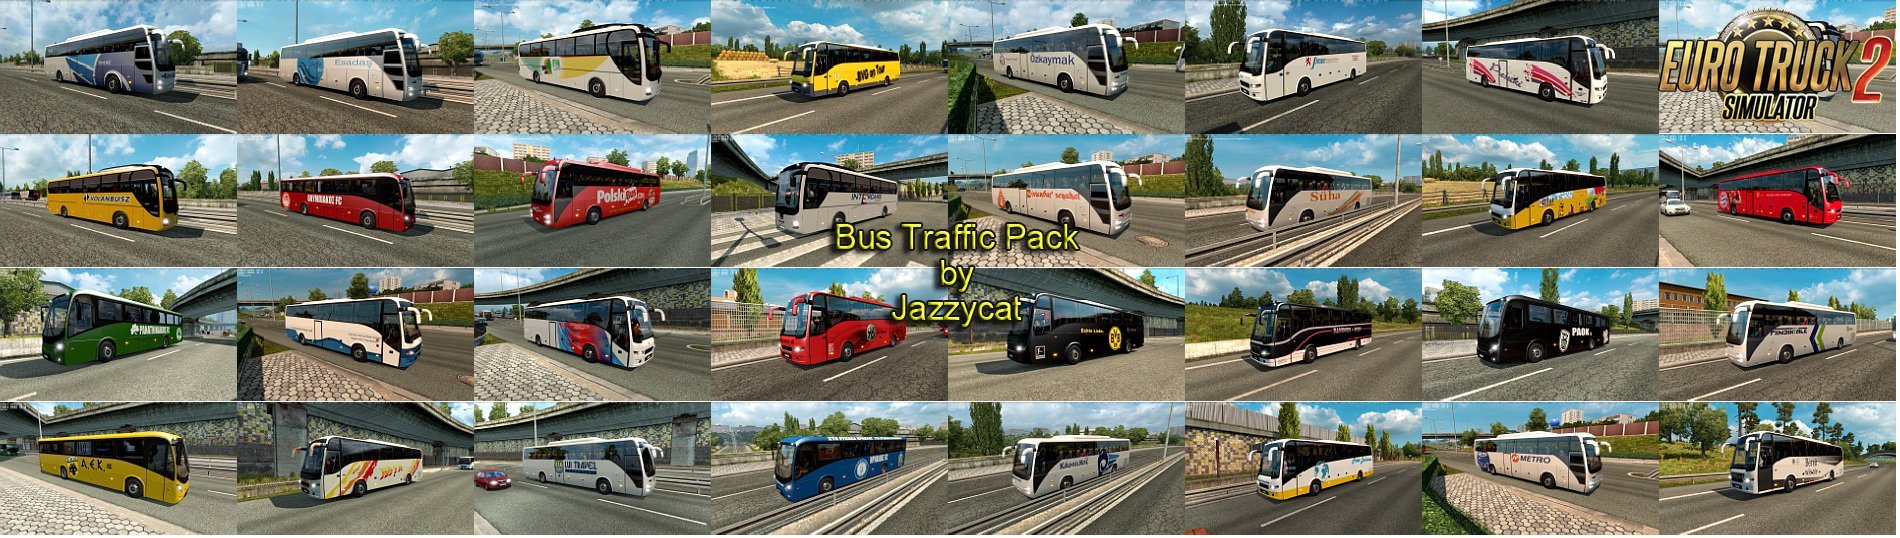 Bus Traffic Pack v1.6 by Jazzycat (1.26.x) for ETS 2